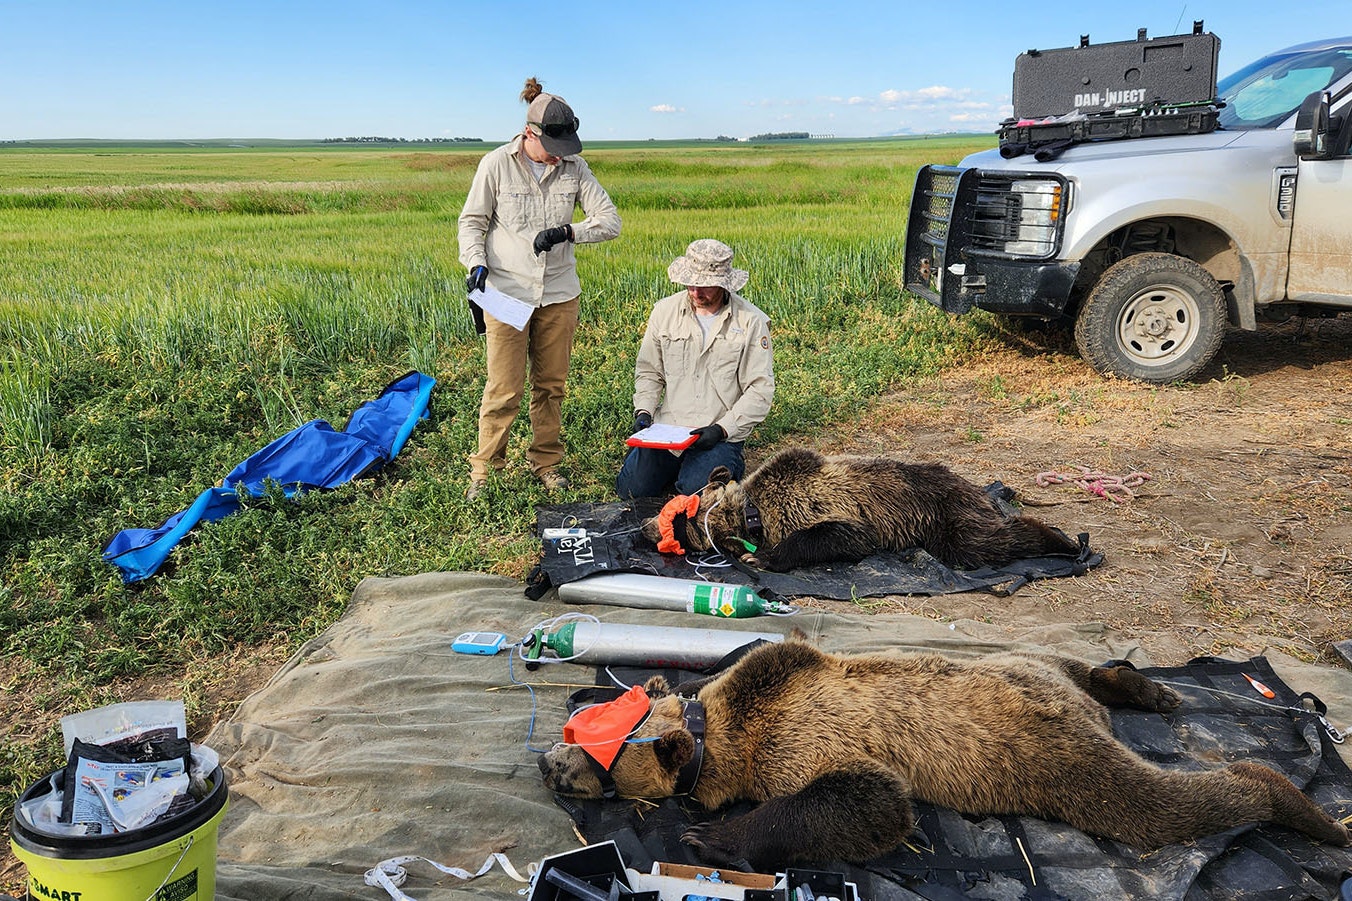 Montana Fish, Wildlife and Parks biologists examine two yearling sibling grizzlies. The young bears, along with a third sibling (not pictured) had to be tranquilized and relocated from the prairie near Valier, Montana earlier this month. They had been hanging around peoples’ houses.